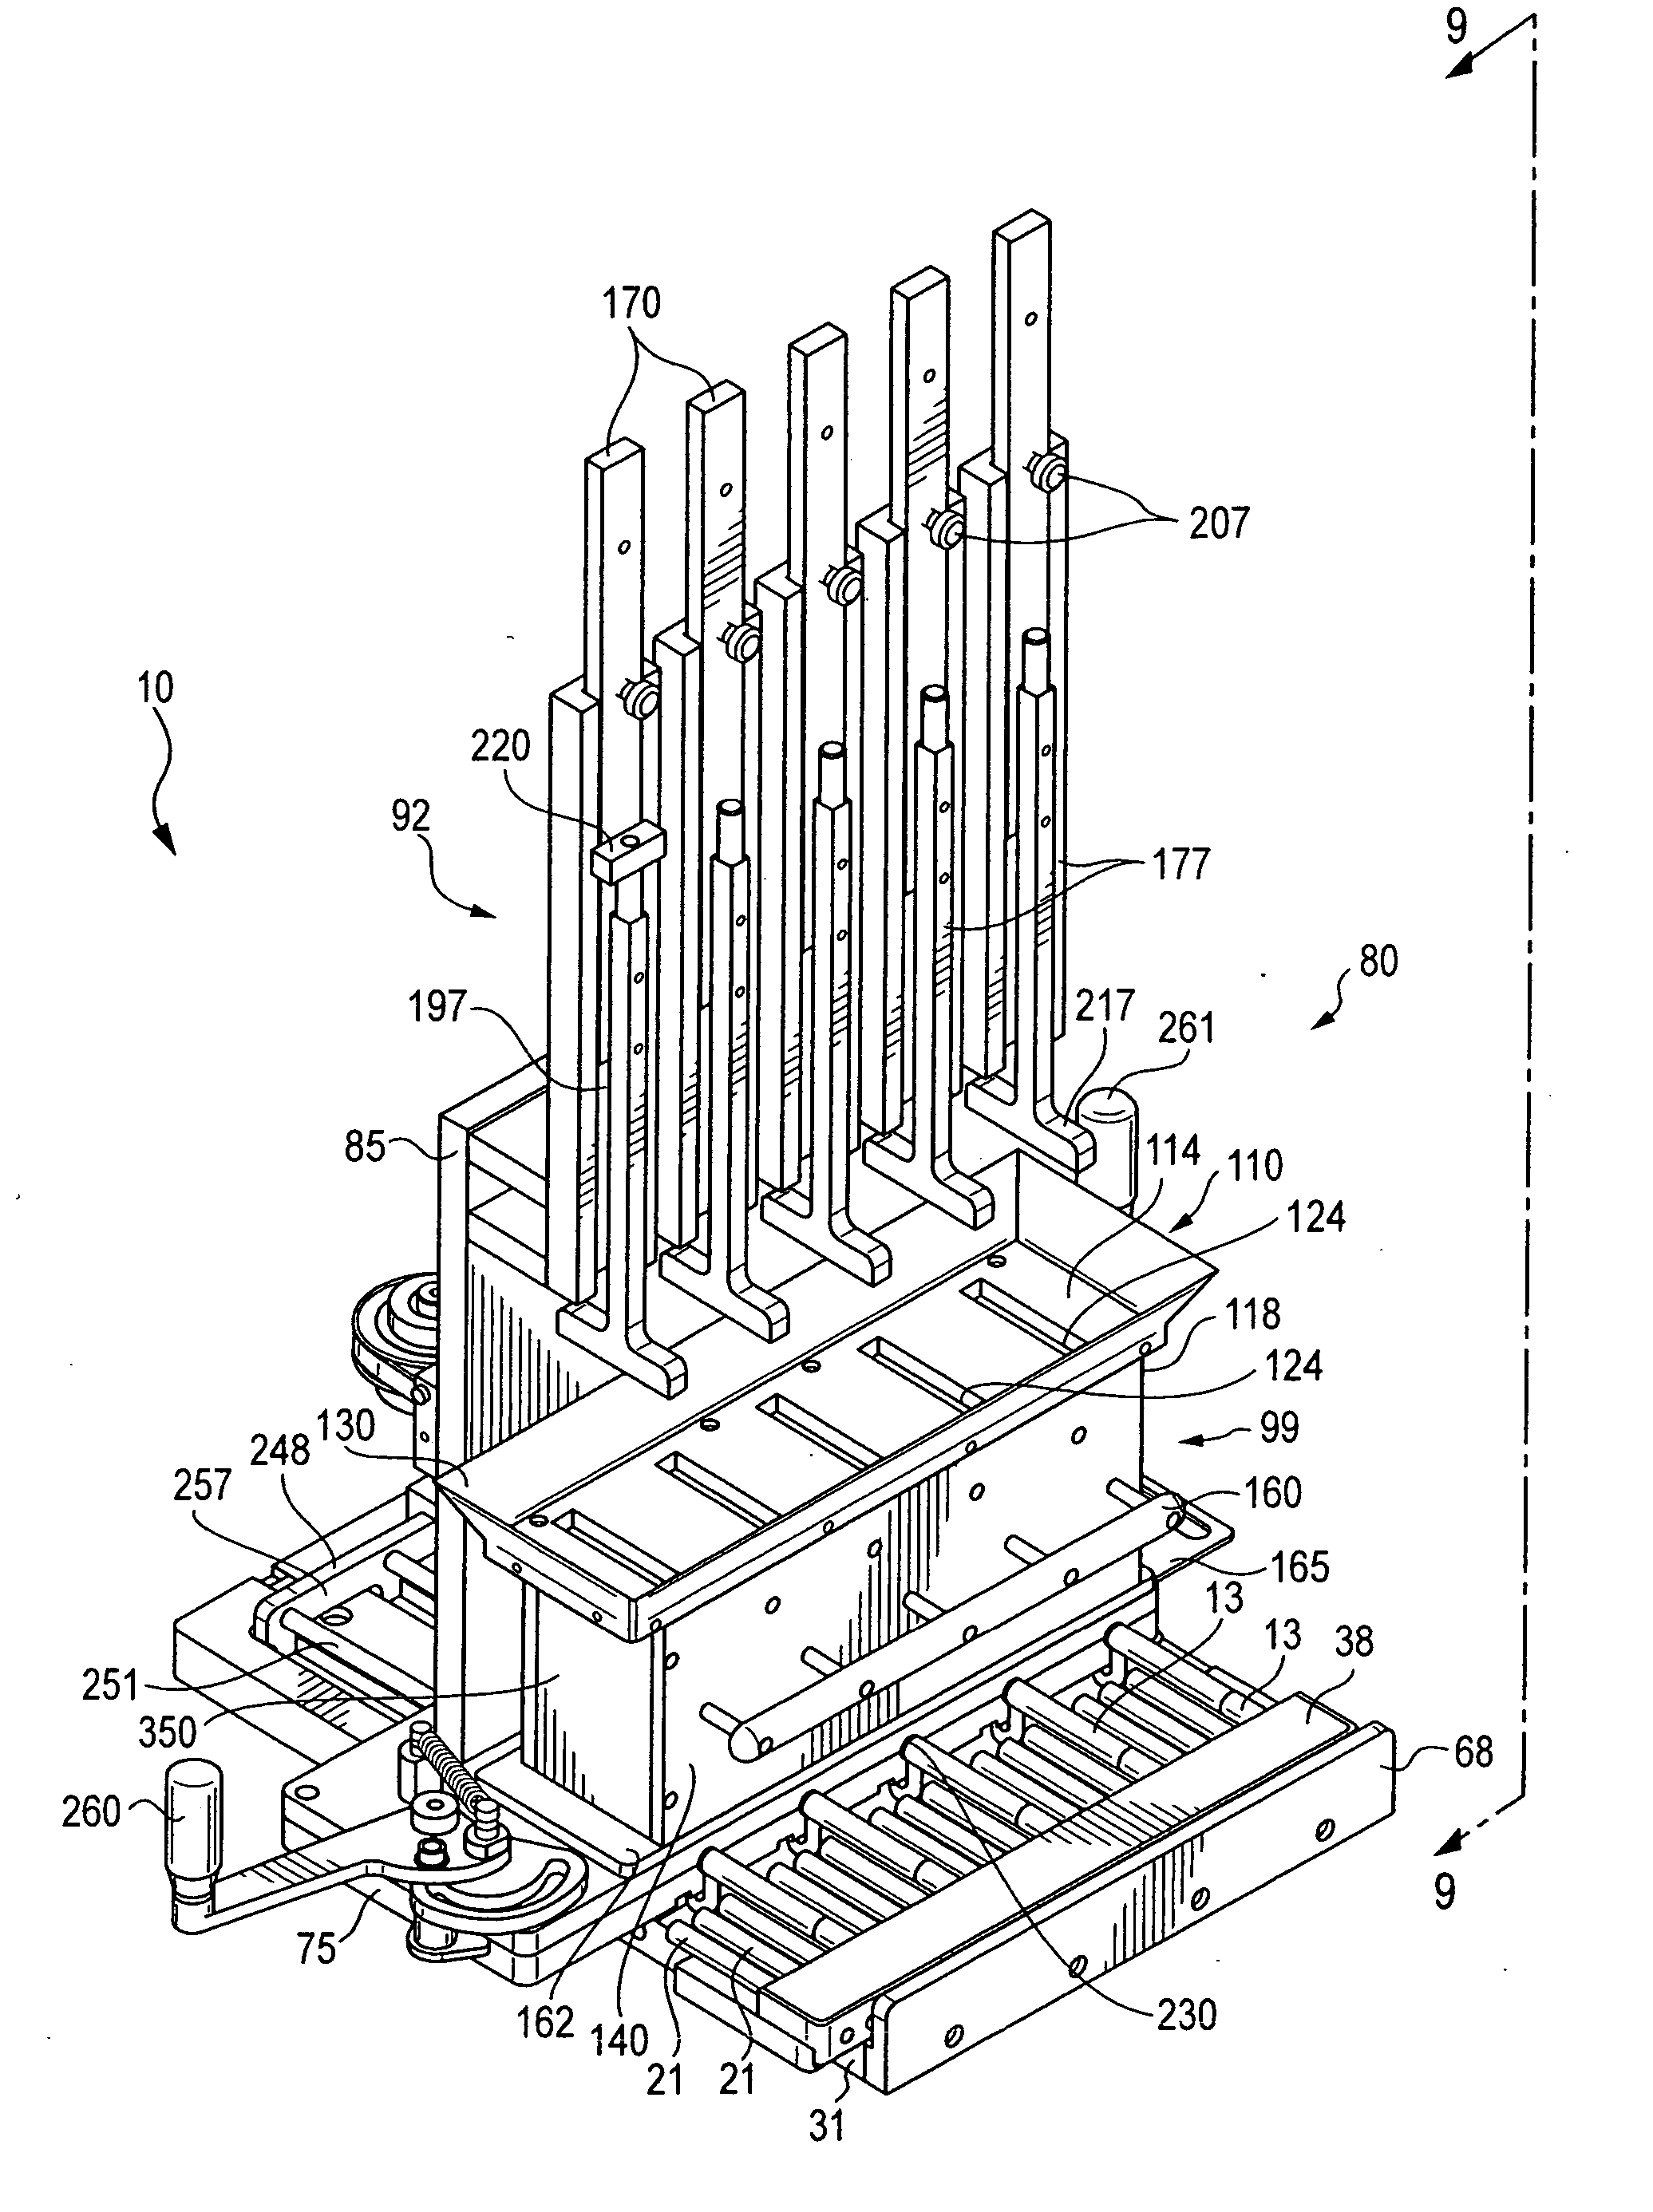 Apparatus and methods for manufacturing cigarettes